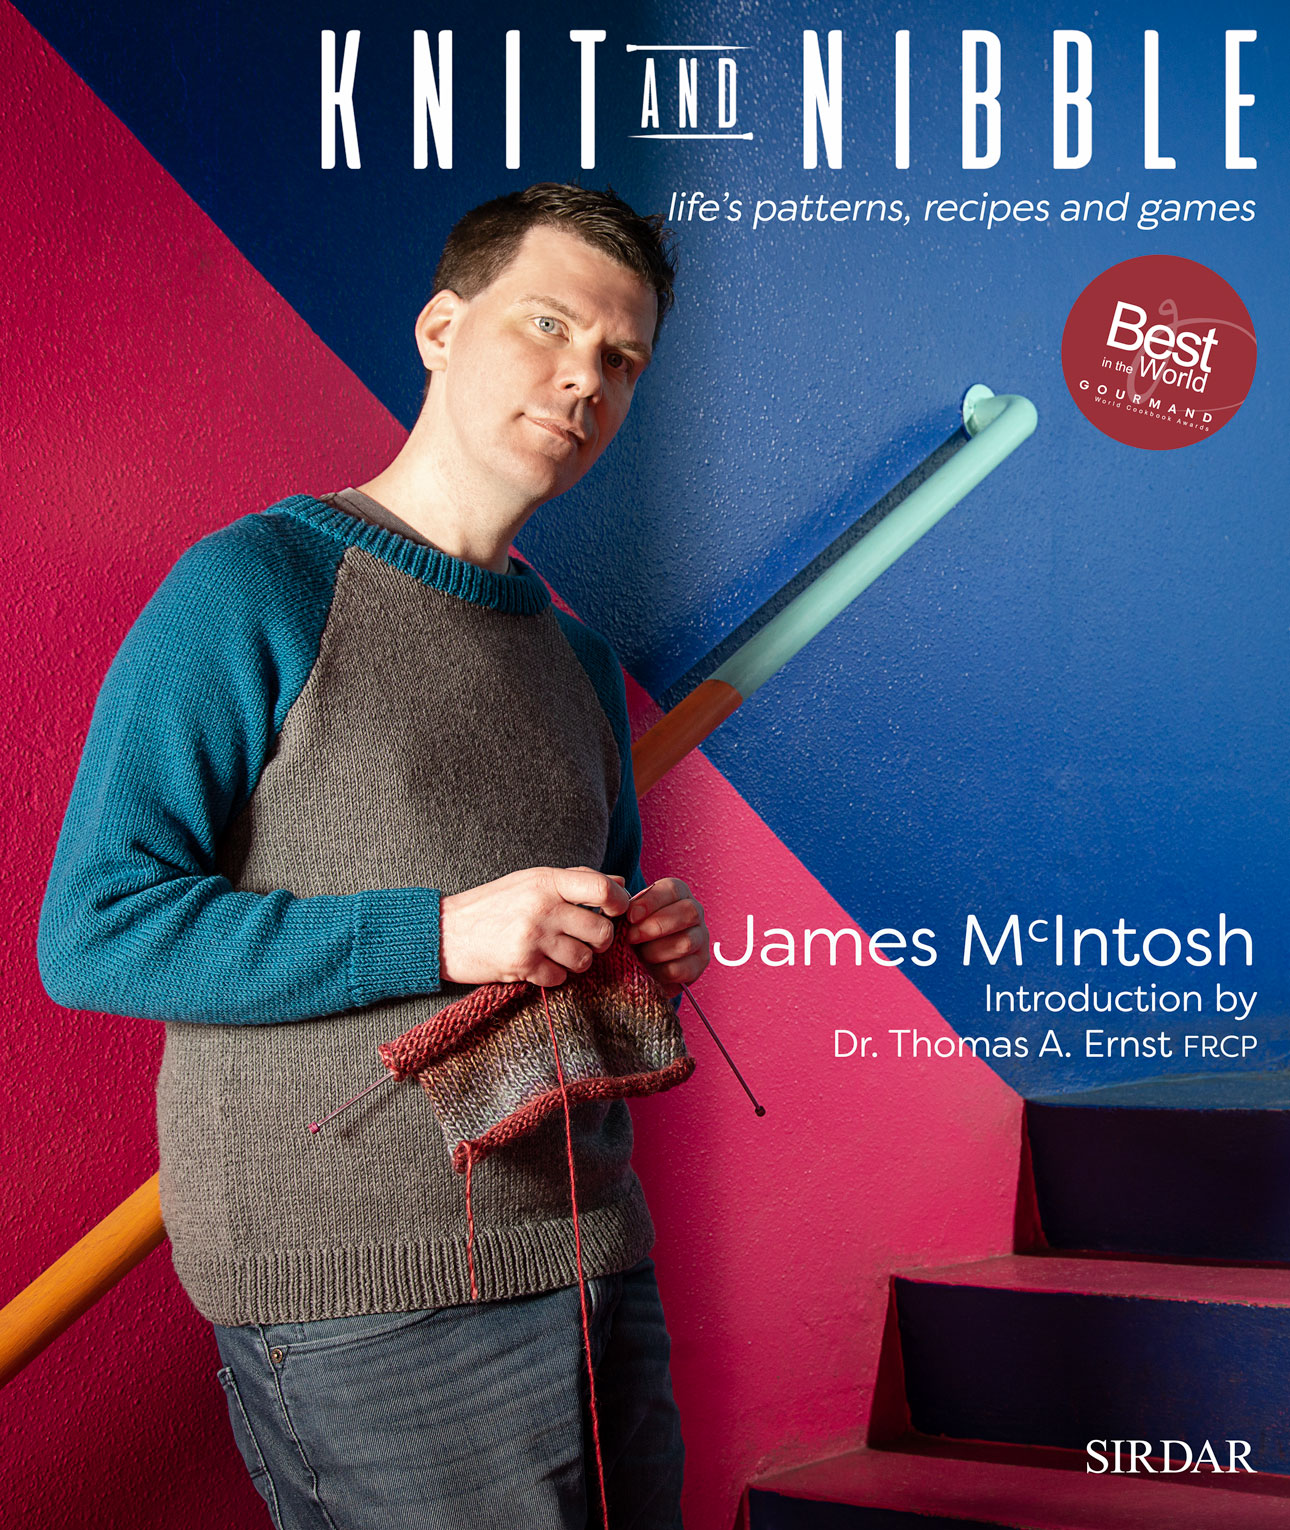 Knitting Books and Patterns, How to Knit